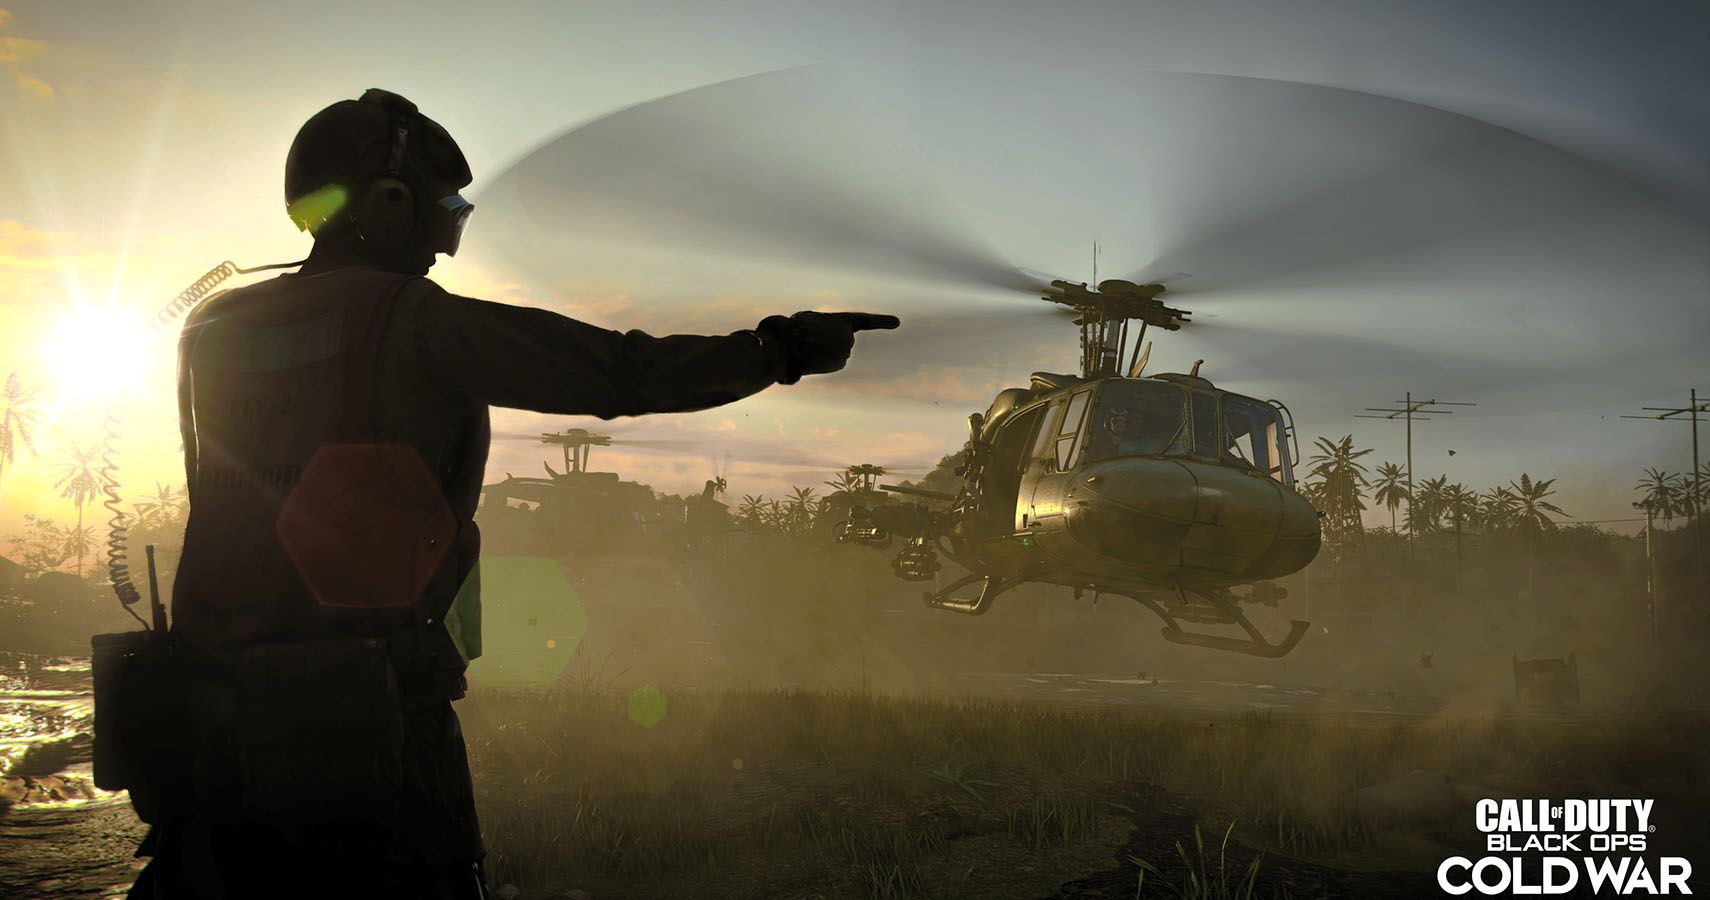 Screenshot from Call of Duty Black Ops: Cold War showing a man directing a helicopter. Image from Activision.